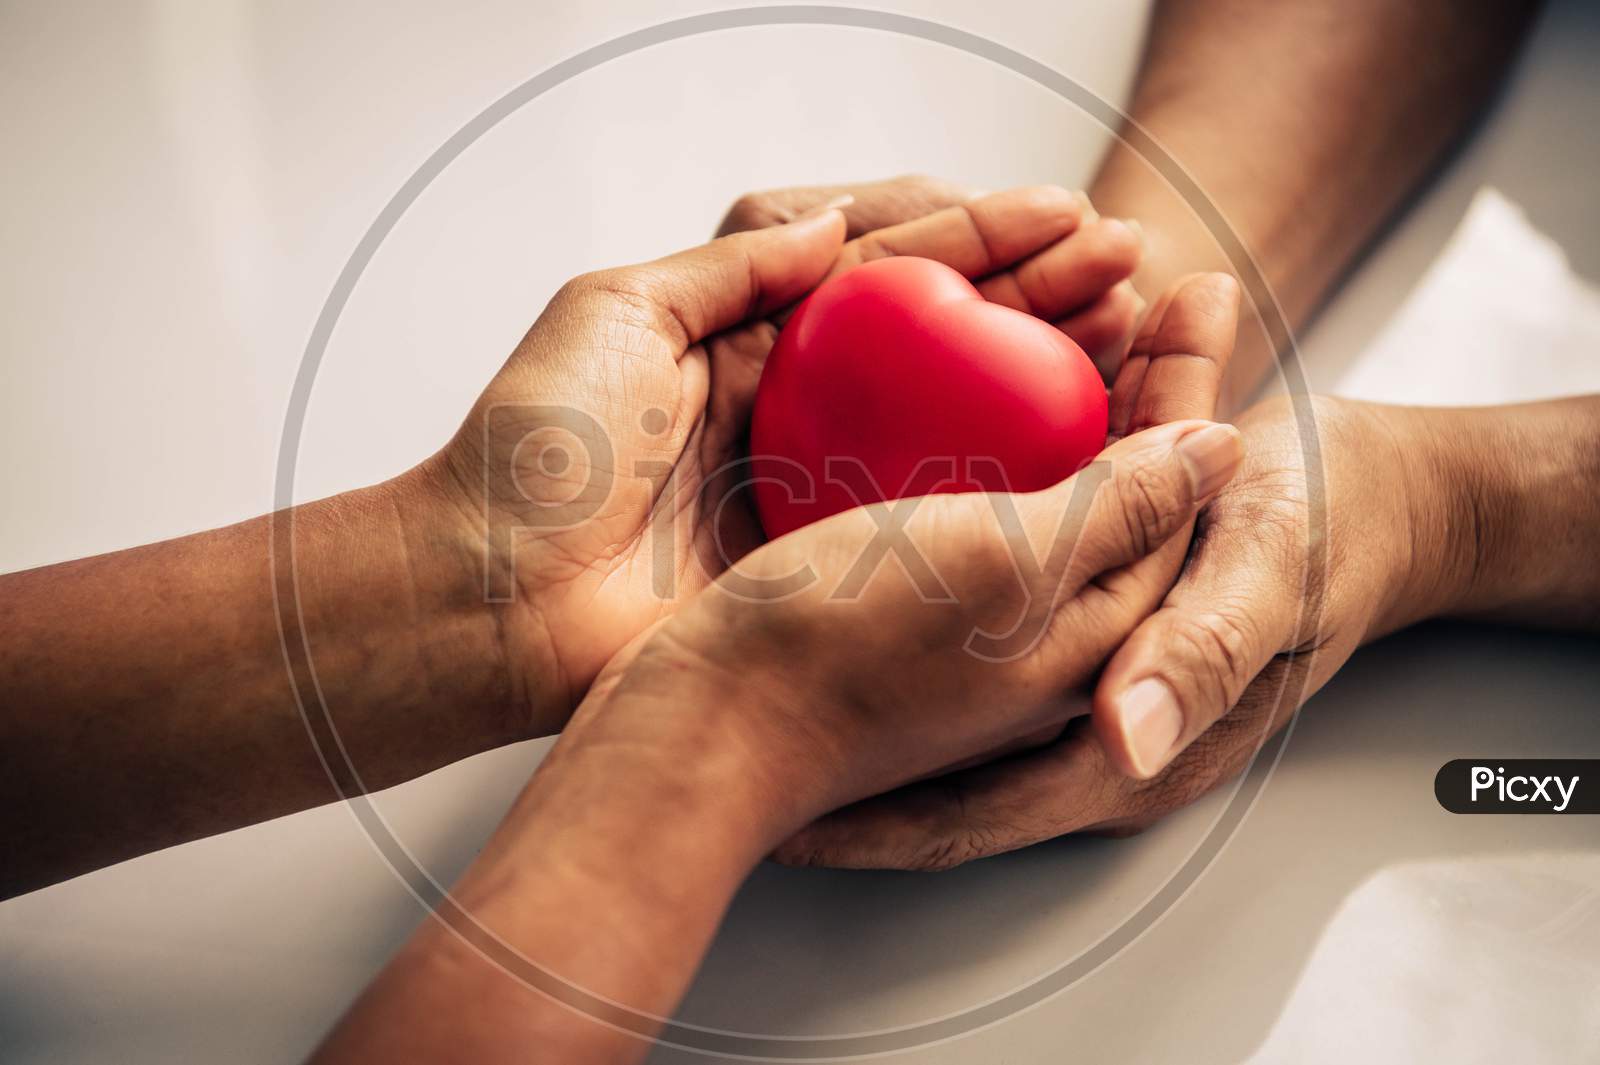 Helping Hand Of Heart Donor For Patient In Heart Disease. Man Give Red Heart To Woman As Couple. People Lifestyle And Couple Romance. Healthcare And Hospital Medical Concept. Symbolic Of Valentine Day